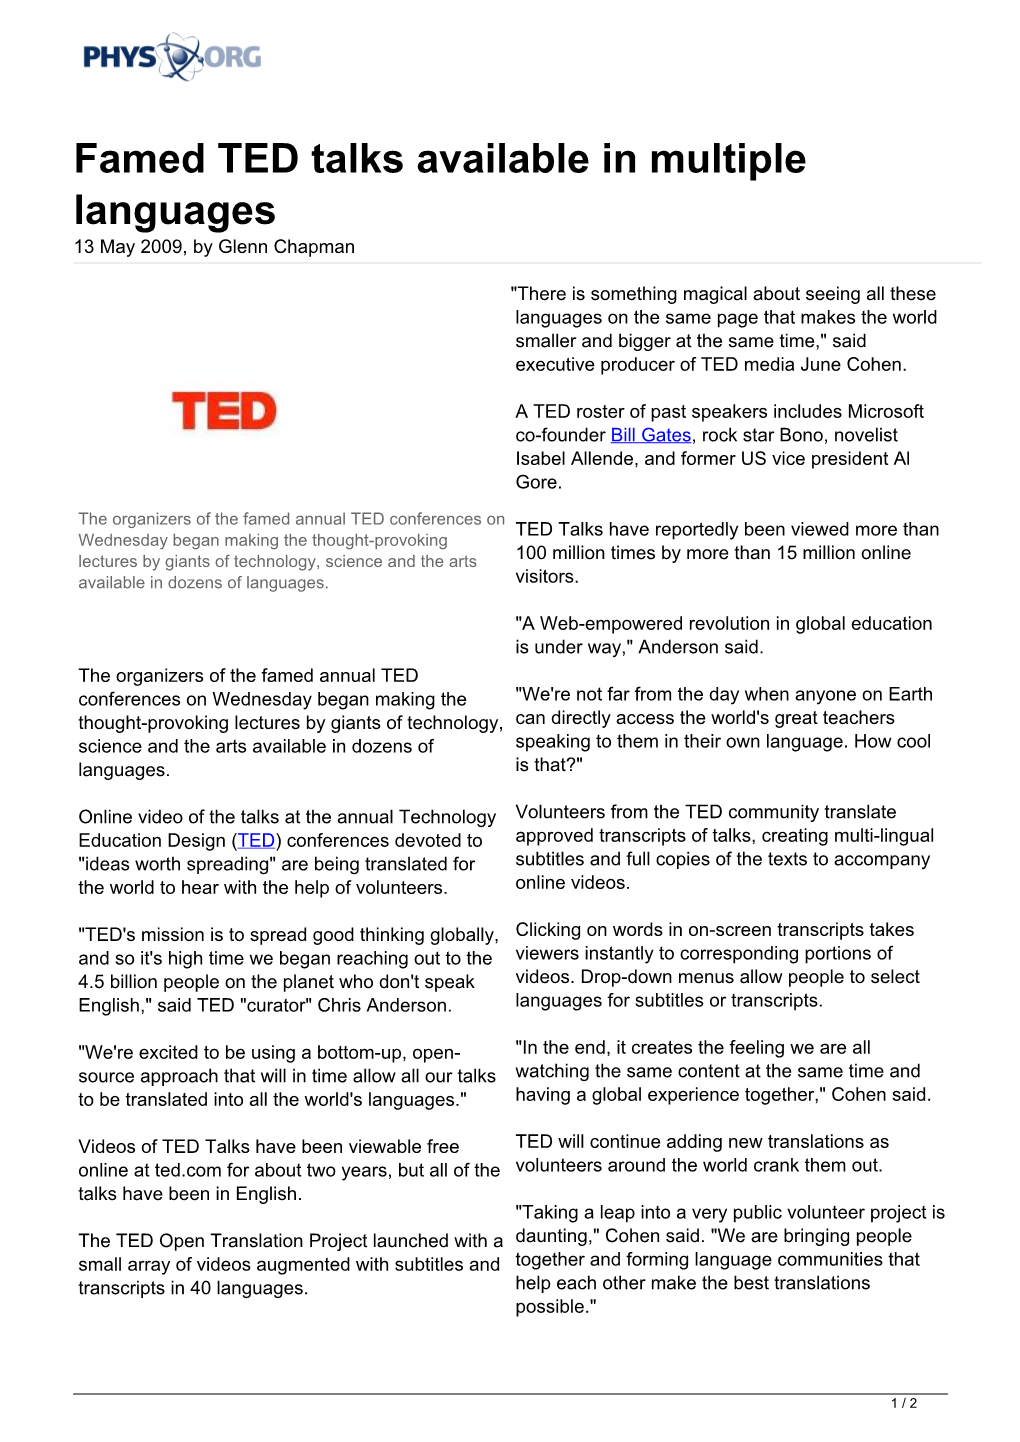 Famed TED Talks Available in Multiple Languages 13 May 2009, by Glenn Chapman